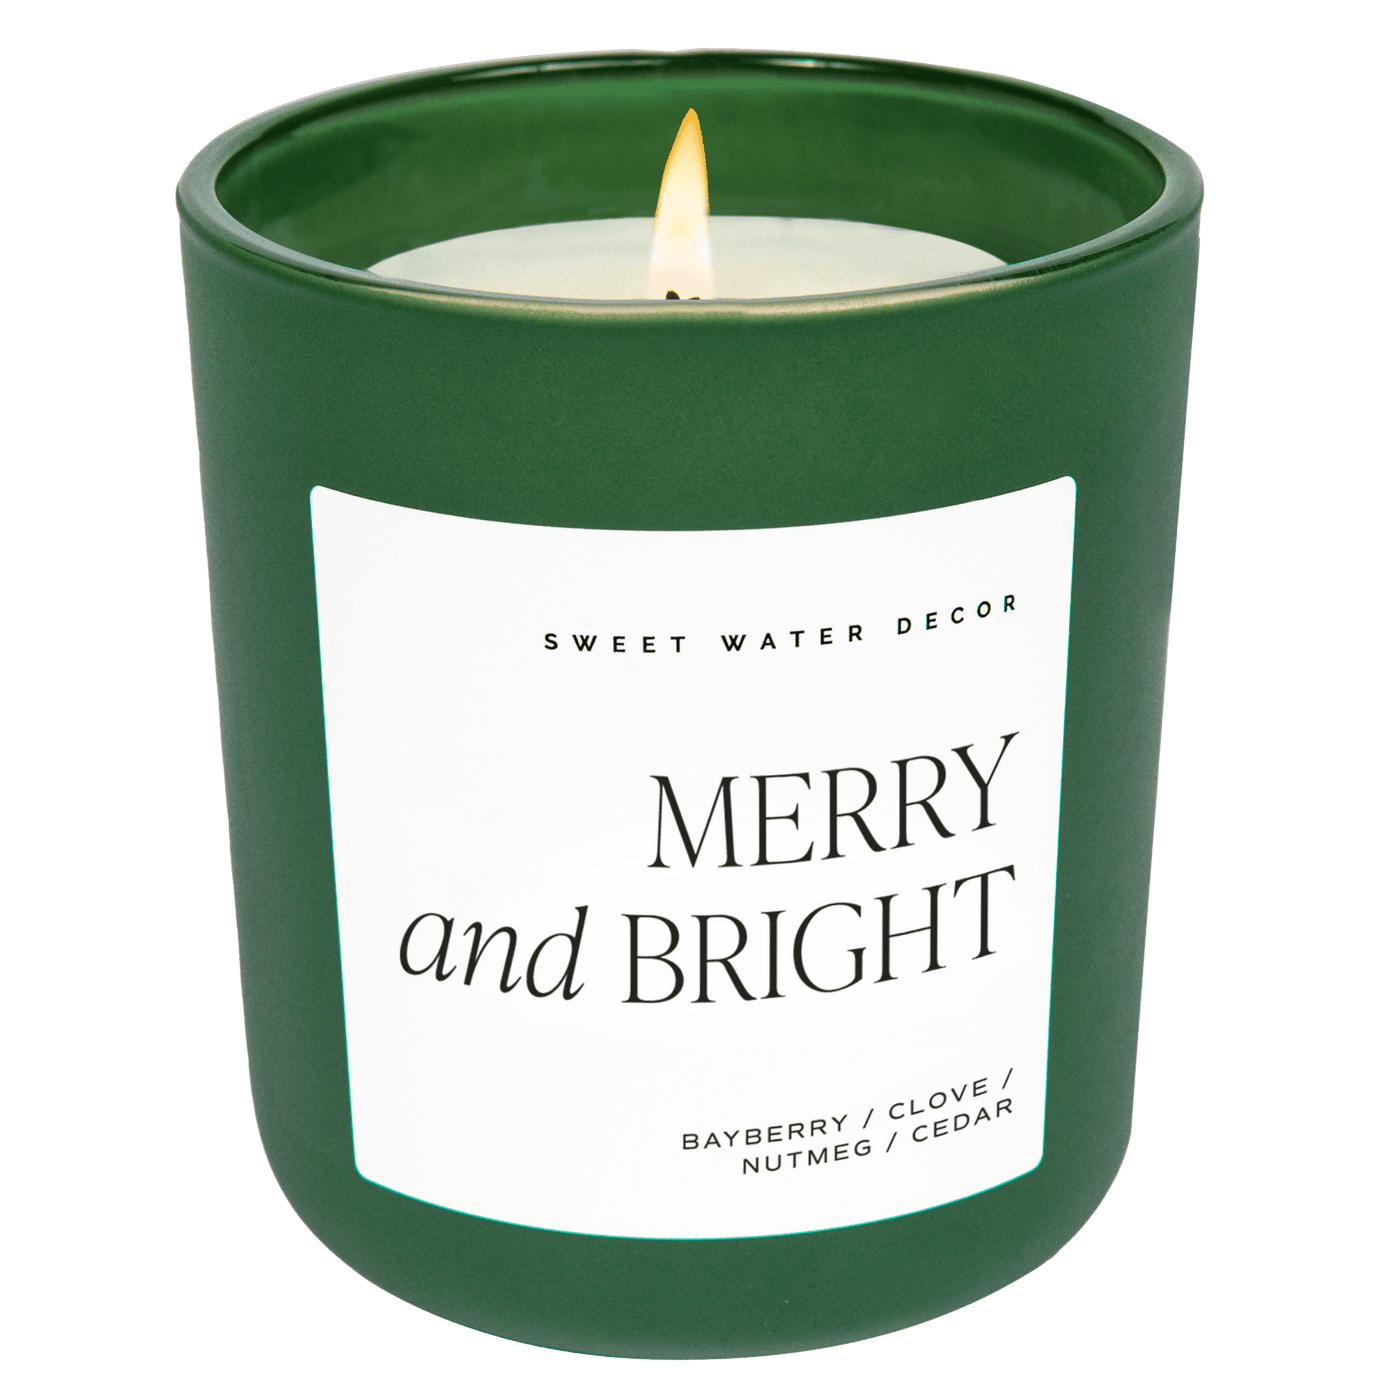 Merry and Bright Soy Candle - Green Matte Jar - 15 oz - Sweet Water Decor - Candles